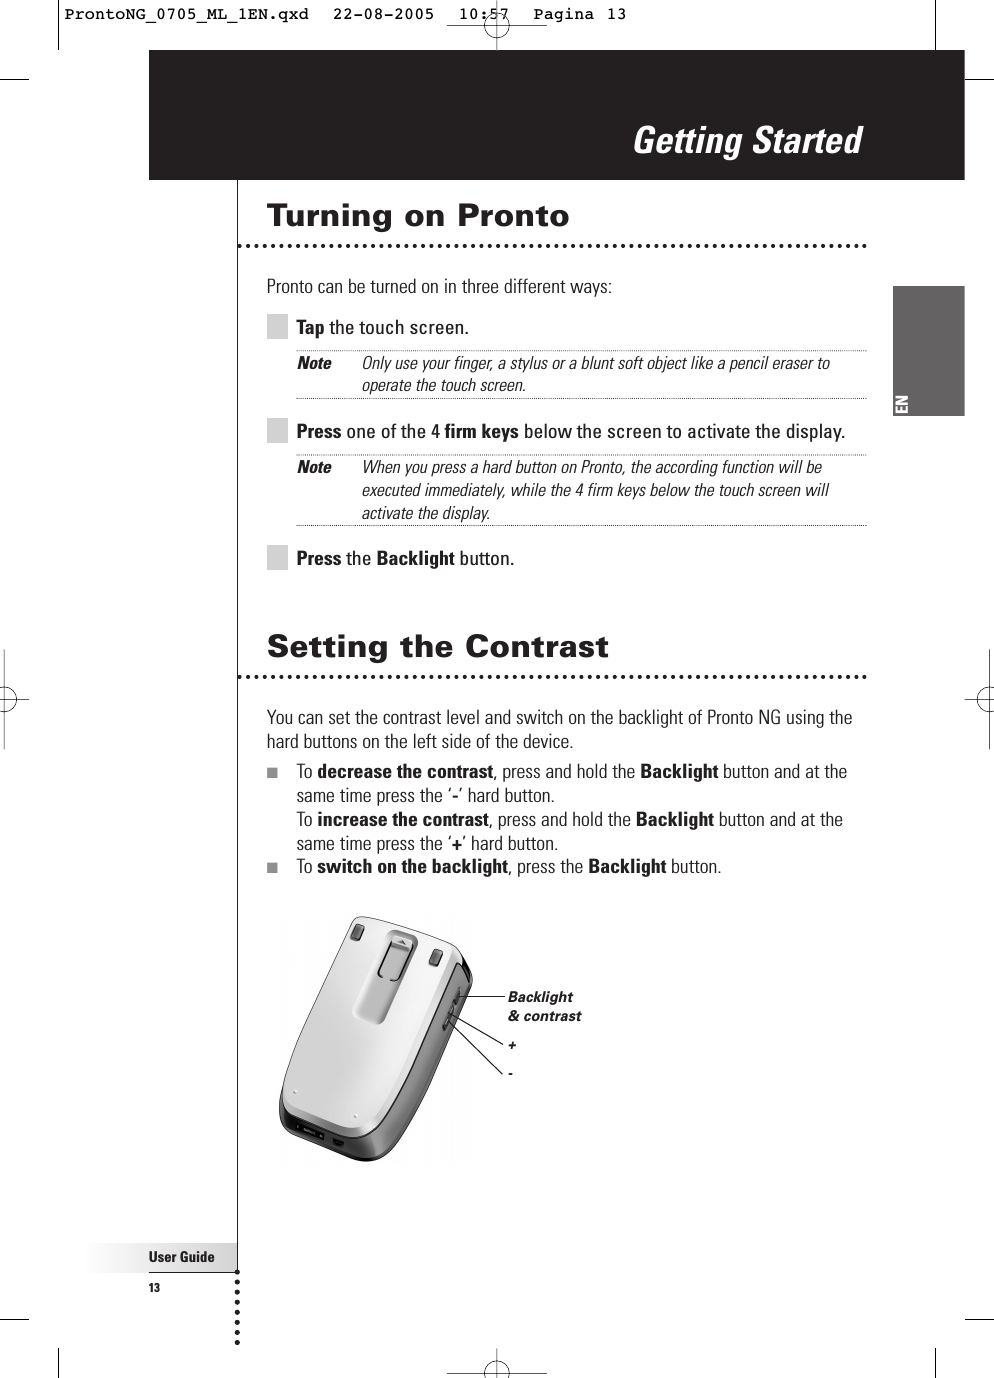 User Guide13ENTurning on ProntoPronto can be turned on in three different ways:Tap the touch screen.Note Only use your finger, a stylus or a blunt soft object like a pencil eraser tooperate the touch screen.Press one of the 4 firm keys below the screen to activate the display.Note When you press a hard button on Pronto, the according function will beexecuted immediately, while the 4 firm keys below the touch screen willactivate the display.Press the Backlight button.Setting the ContrastYou can set the contrast level and switch on the backlight of Pronto NG using thehard buttons on the left side of the device.■To decrease the contrast, press and hold the Backlight button and at thesame time press the ‘-’ hard button. To increase the contrast, press and hold the Backlight button and at thesame time press the ‘+’ hard button.■To switch on the backlight, press the Backlight button.Getting StartedBacklight &amp; contrast+-ProntoNG_0705_ML_1EN.qxd  22-08-2005  10:57  Pagina 13